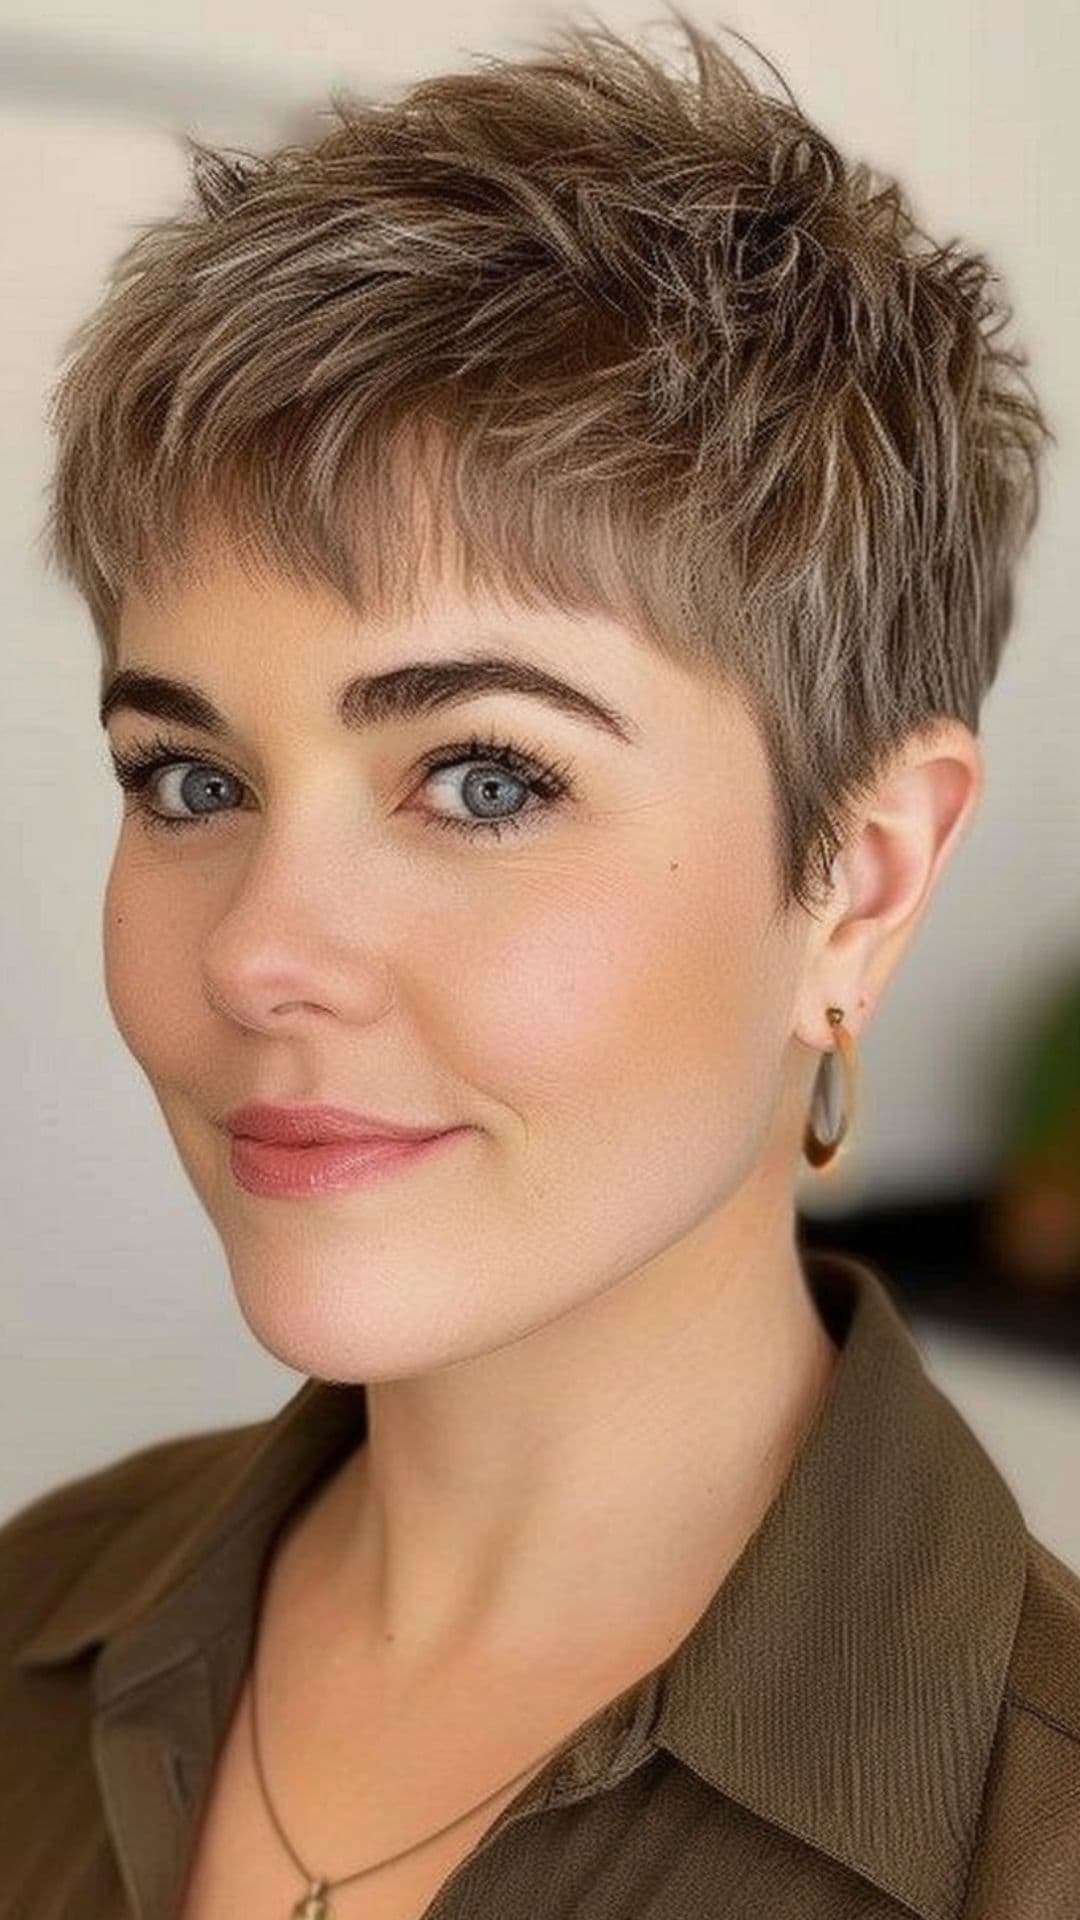 A woman modelling a micro bangs with textured pixie cut.